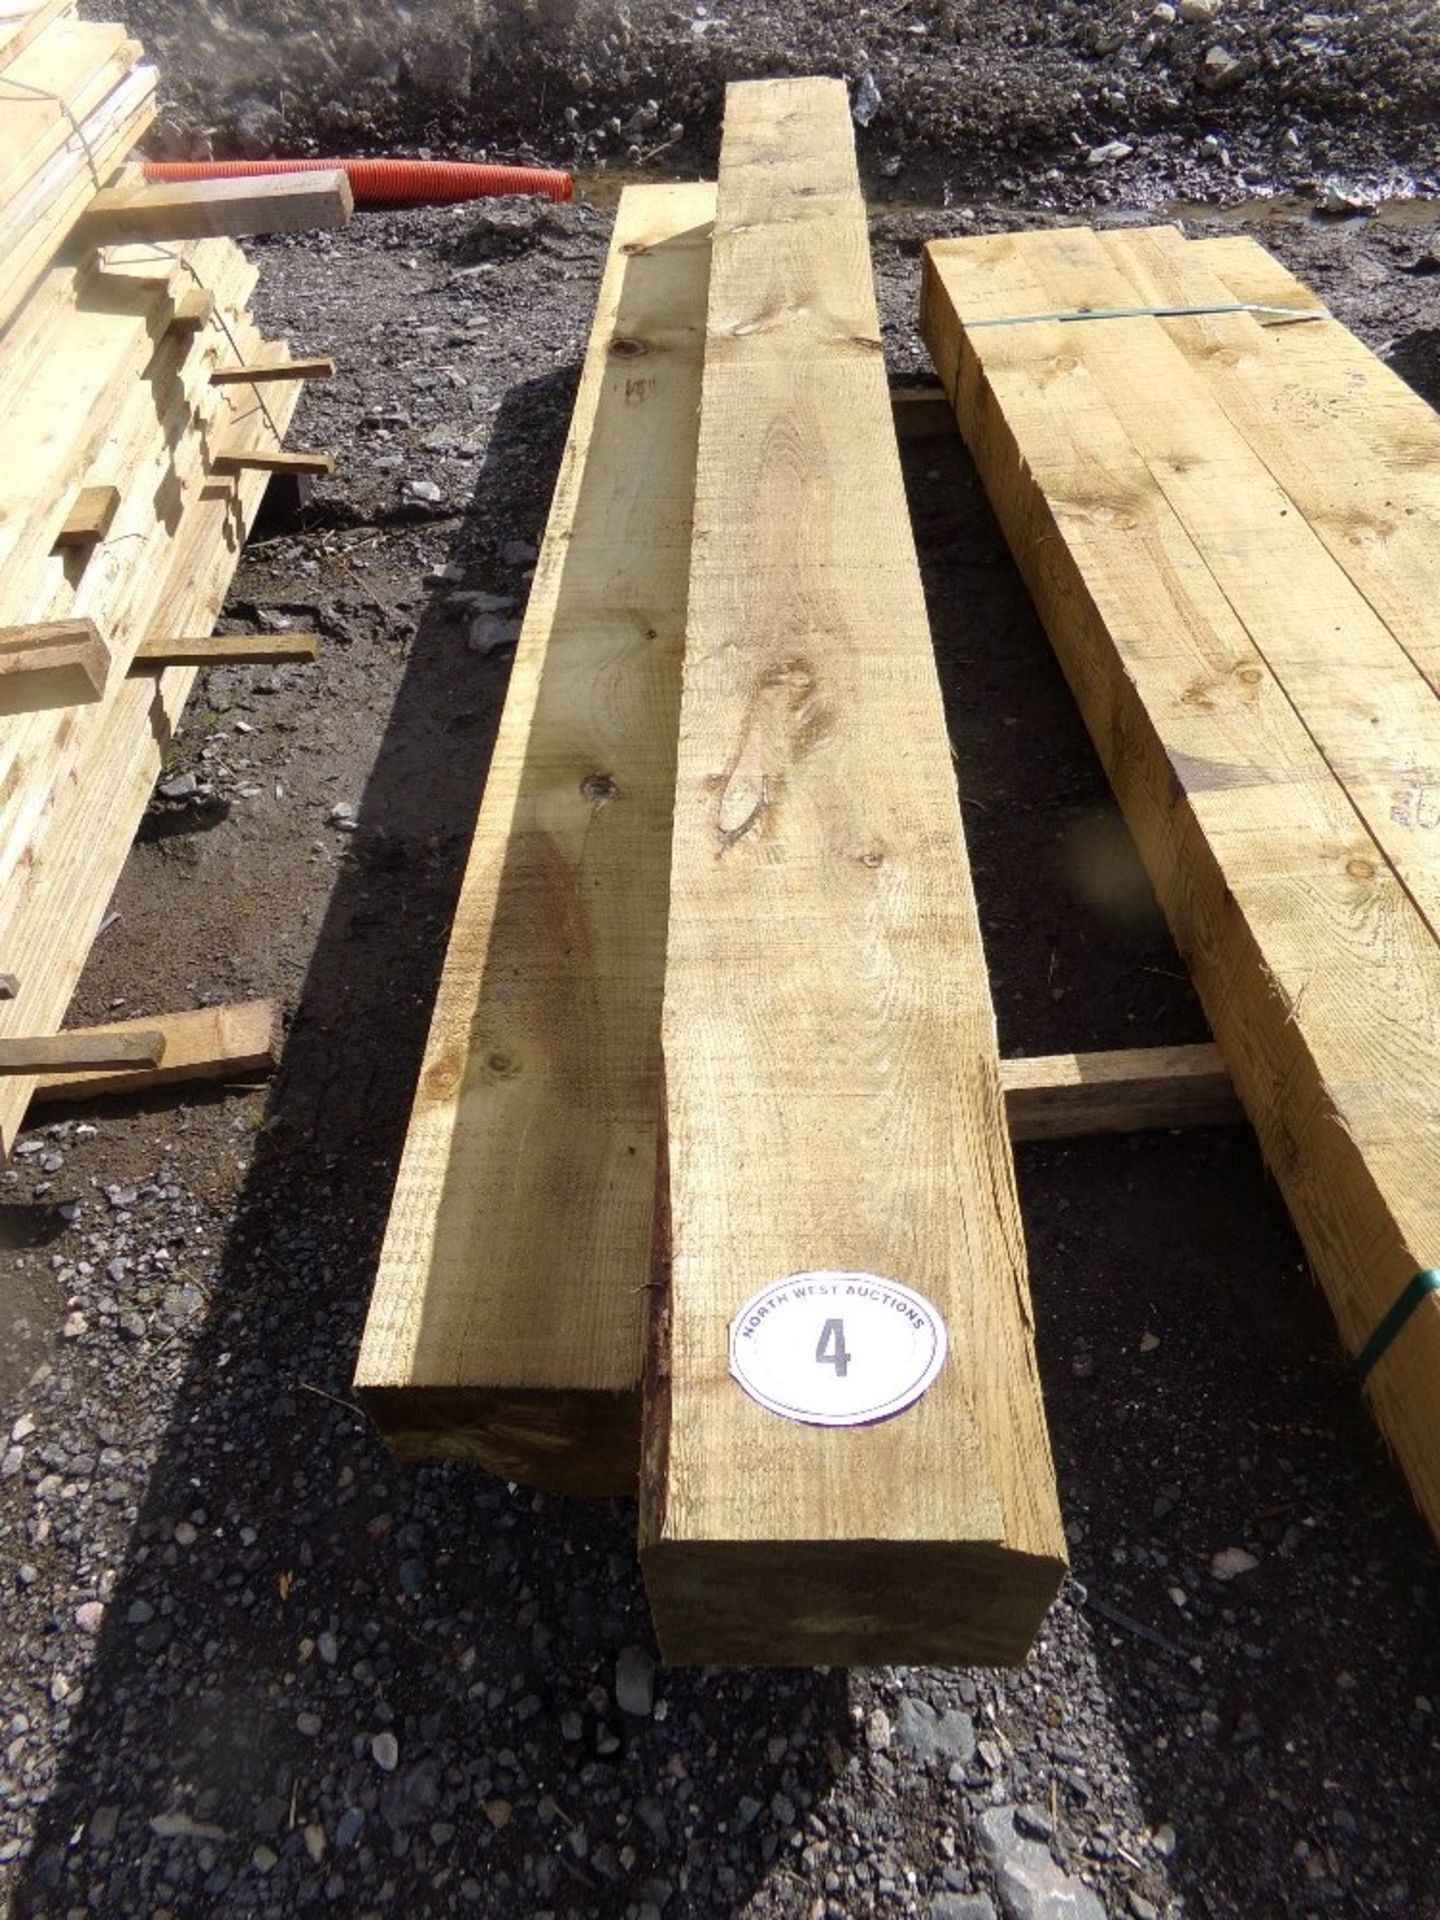 3 POSTS 8 SQUARE X 8FT LONG APPROX (+VA "